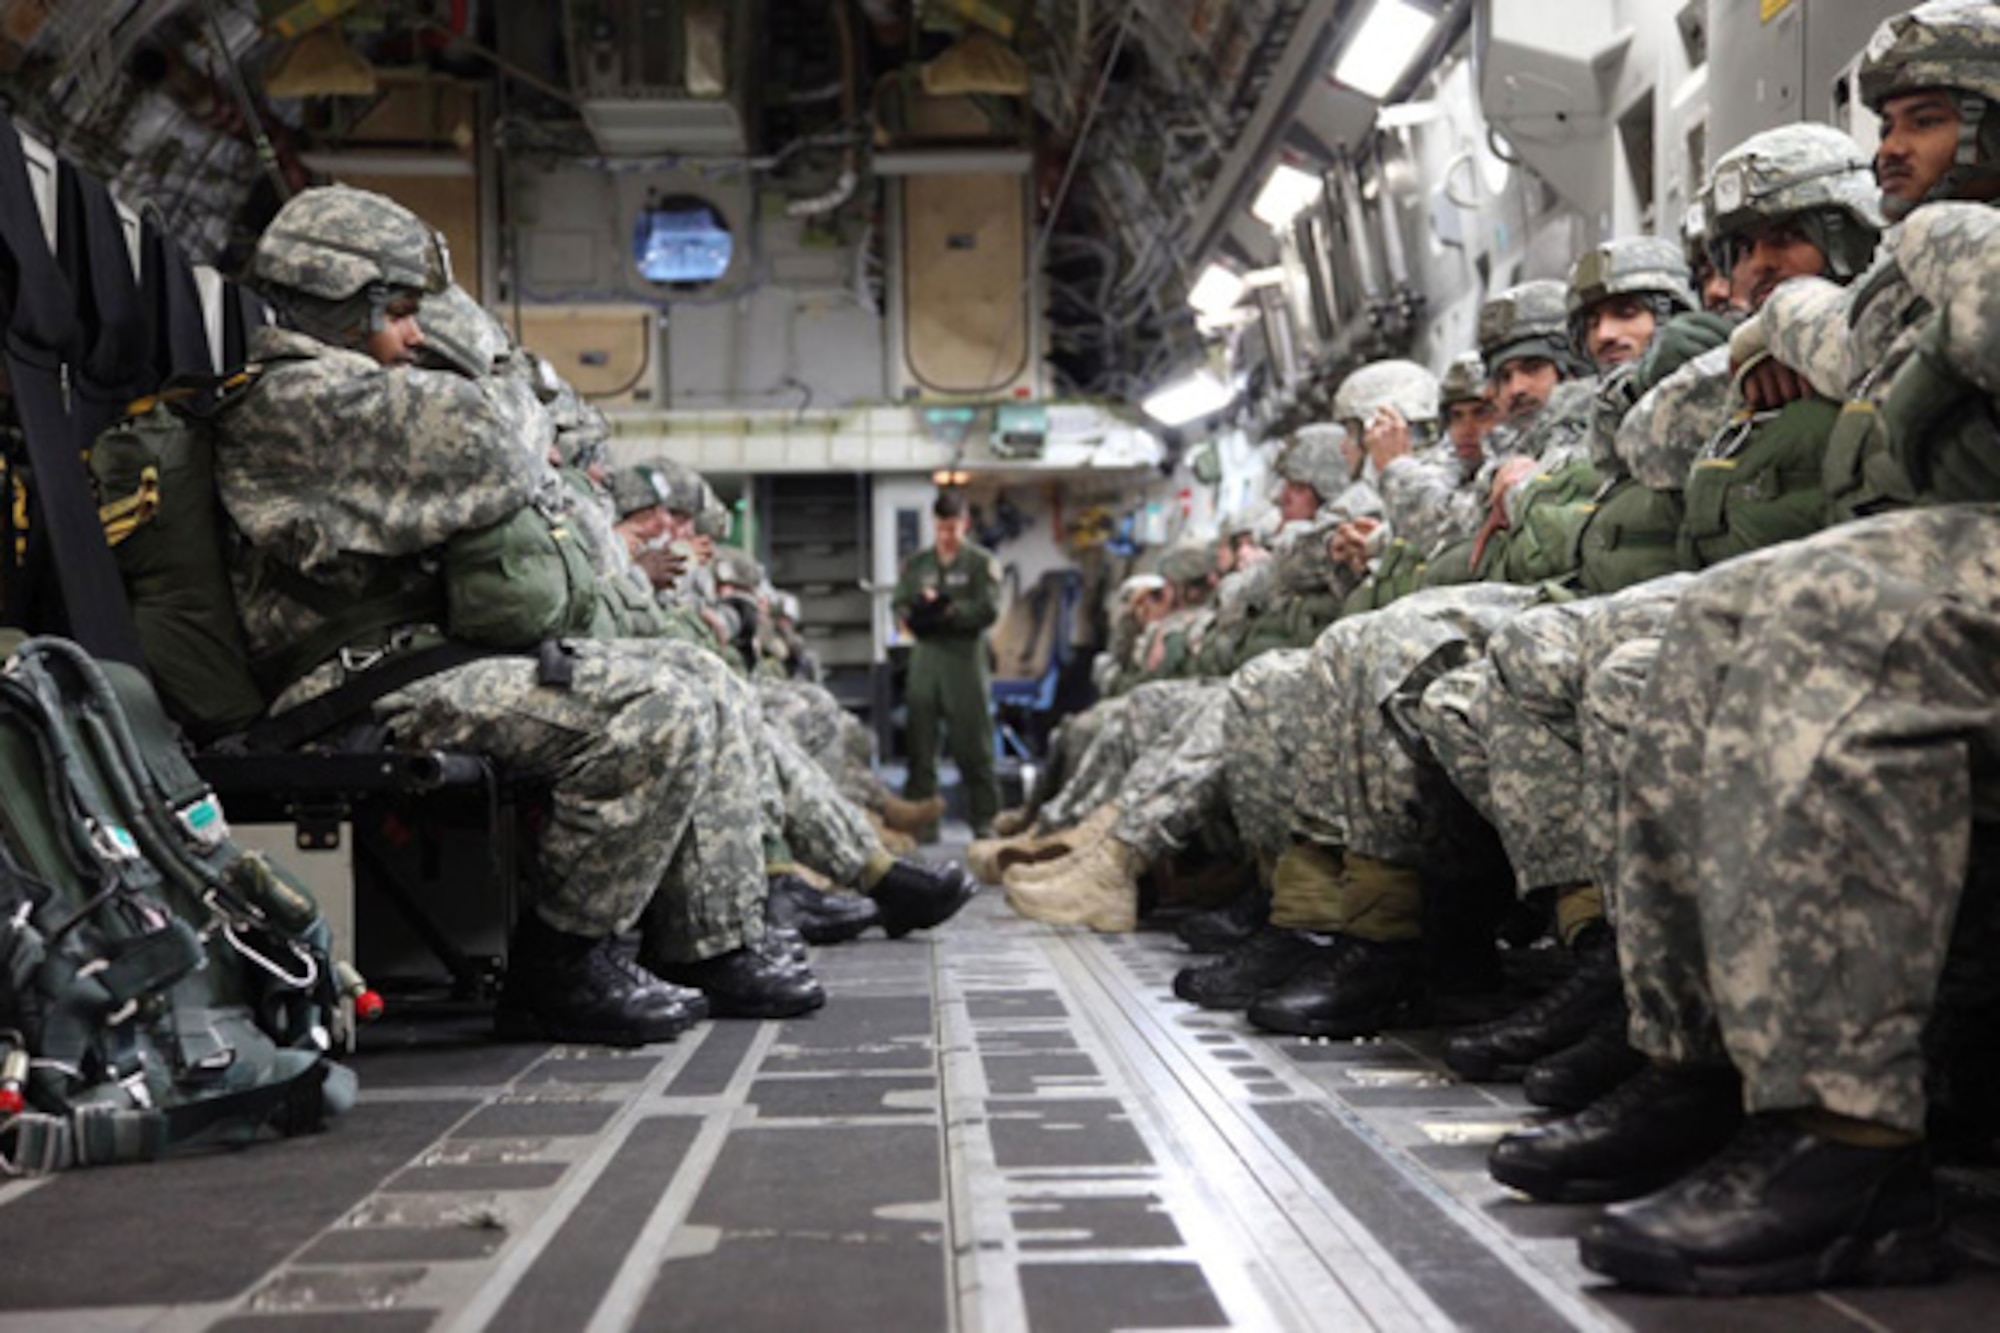 U.S. and Indian army soldiers sit in the back of a C-17 Globemaster III aircraft awaiting commands from jump masters to begin their combined parachute jump, Nov. 10. The jump was part of Yudh Abhyas 2010, an international exercise designed to promote cooperation between the two militaries and hosted by U.S. Army Alaska this year. (U.S. Army photo/Spc. Tiffany Dusterhoft) 